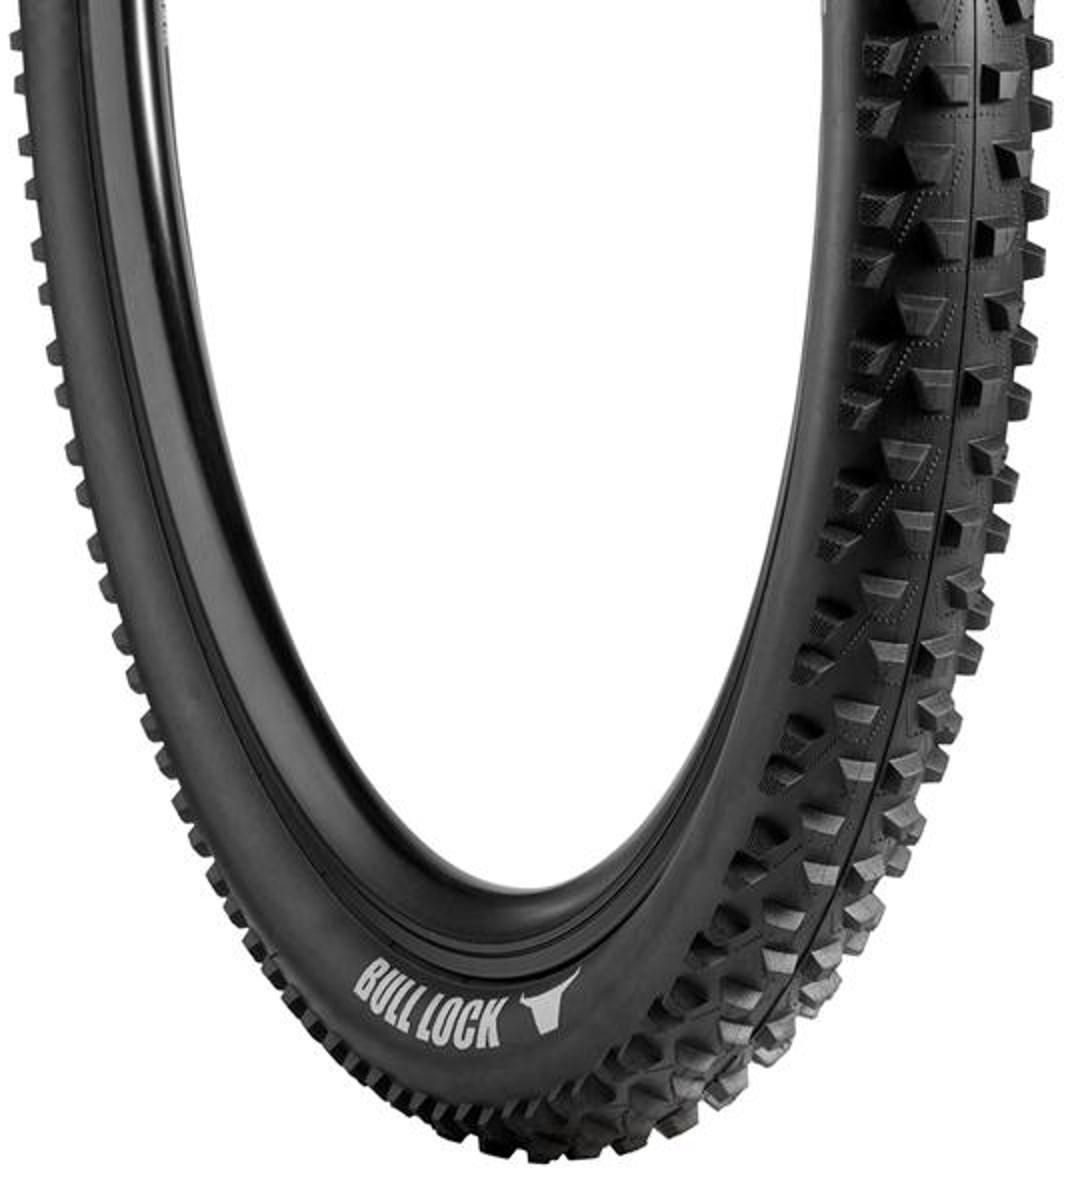 Vredestein Bull Lock Off Road MTB Tyre product image